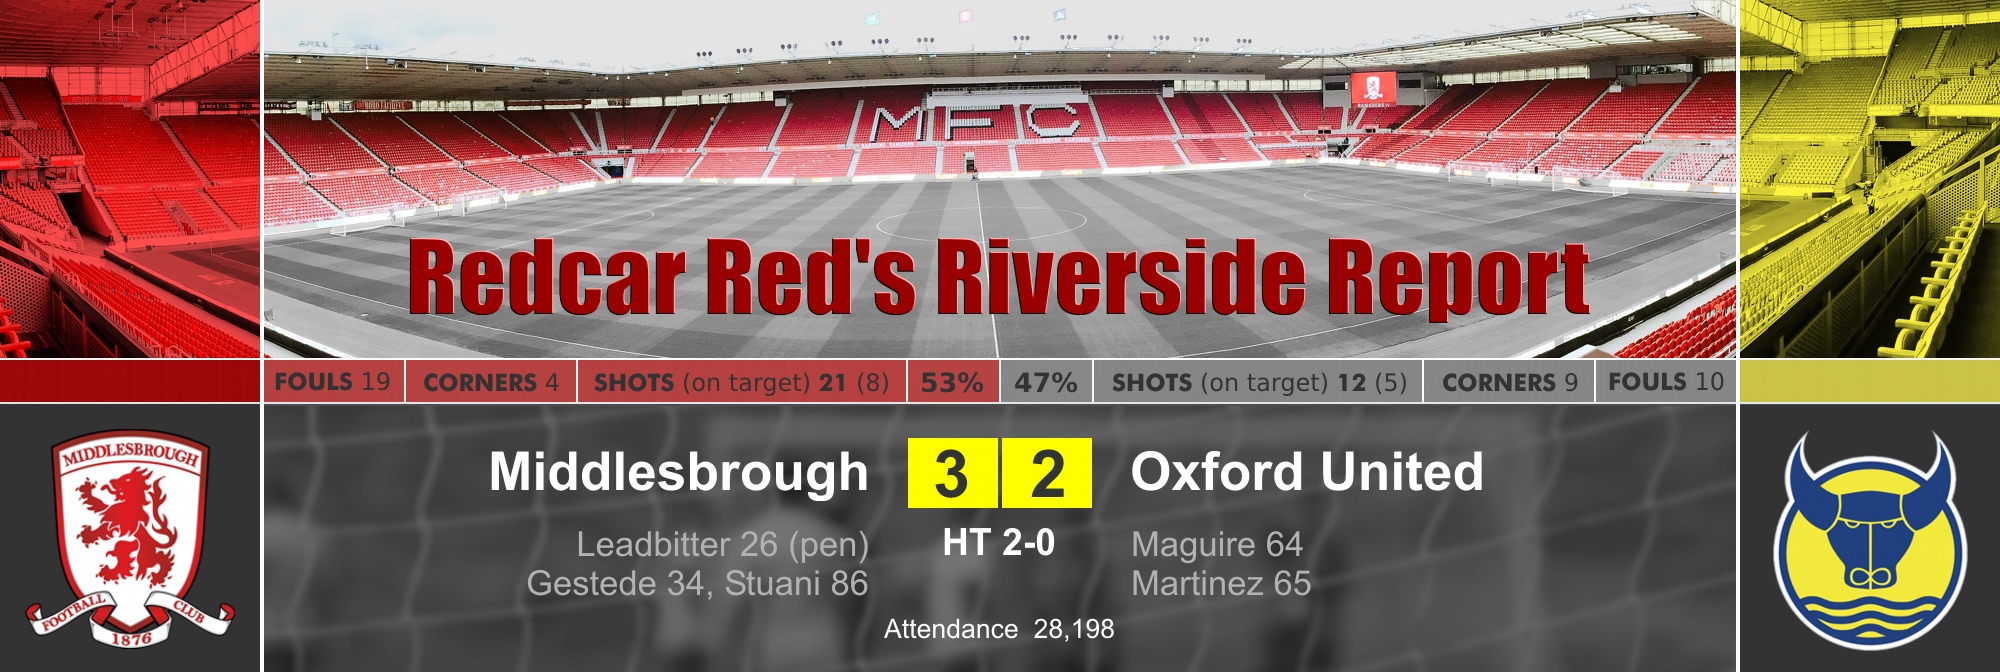 redcar-red-report-oxford